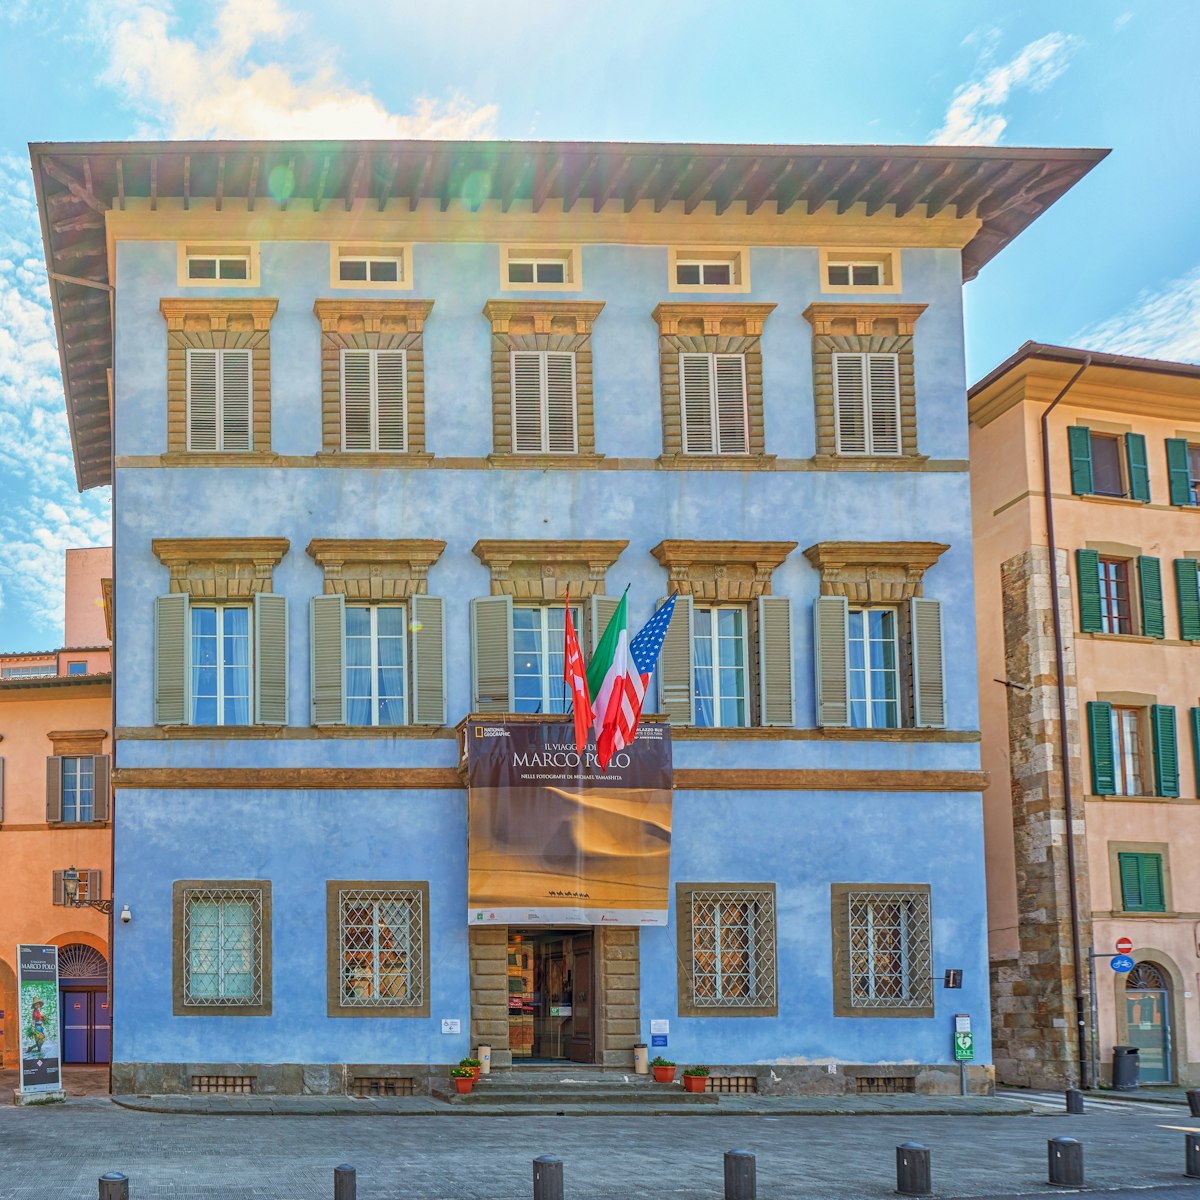 Pisa / Tuscany / Italy / May 2018 : Palazzo Blu is a center for temporary exhibitions and cultural activities in Pisa Italy; Shutterstock ID 1170554812; purchase_order: 65050; job: POI; client: ; other:
1170554812
abstract, architectural, architectural photography, architecture, blue, building, city, design, designer, europe, facade, italy, lookup, minimal, minimalism, minimalist, palazzo blu, pisa, sky, street, surreal, toscana, tourism, travel, tuscany, urban, windows